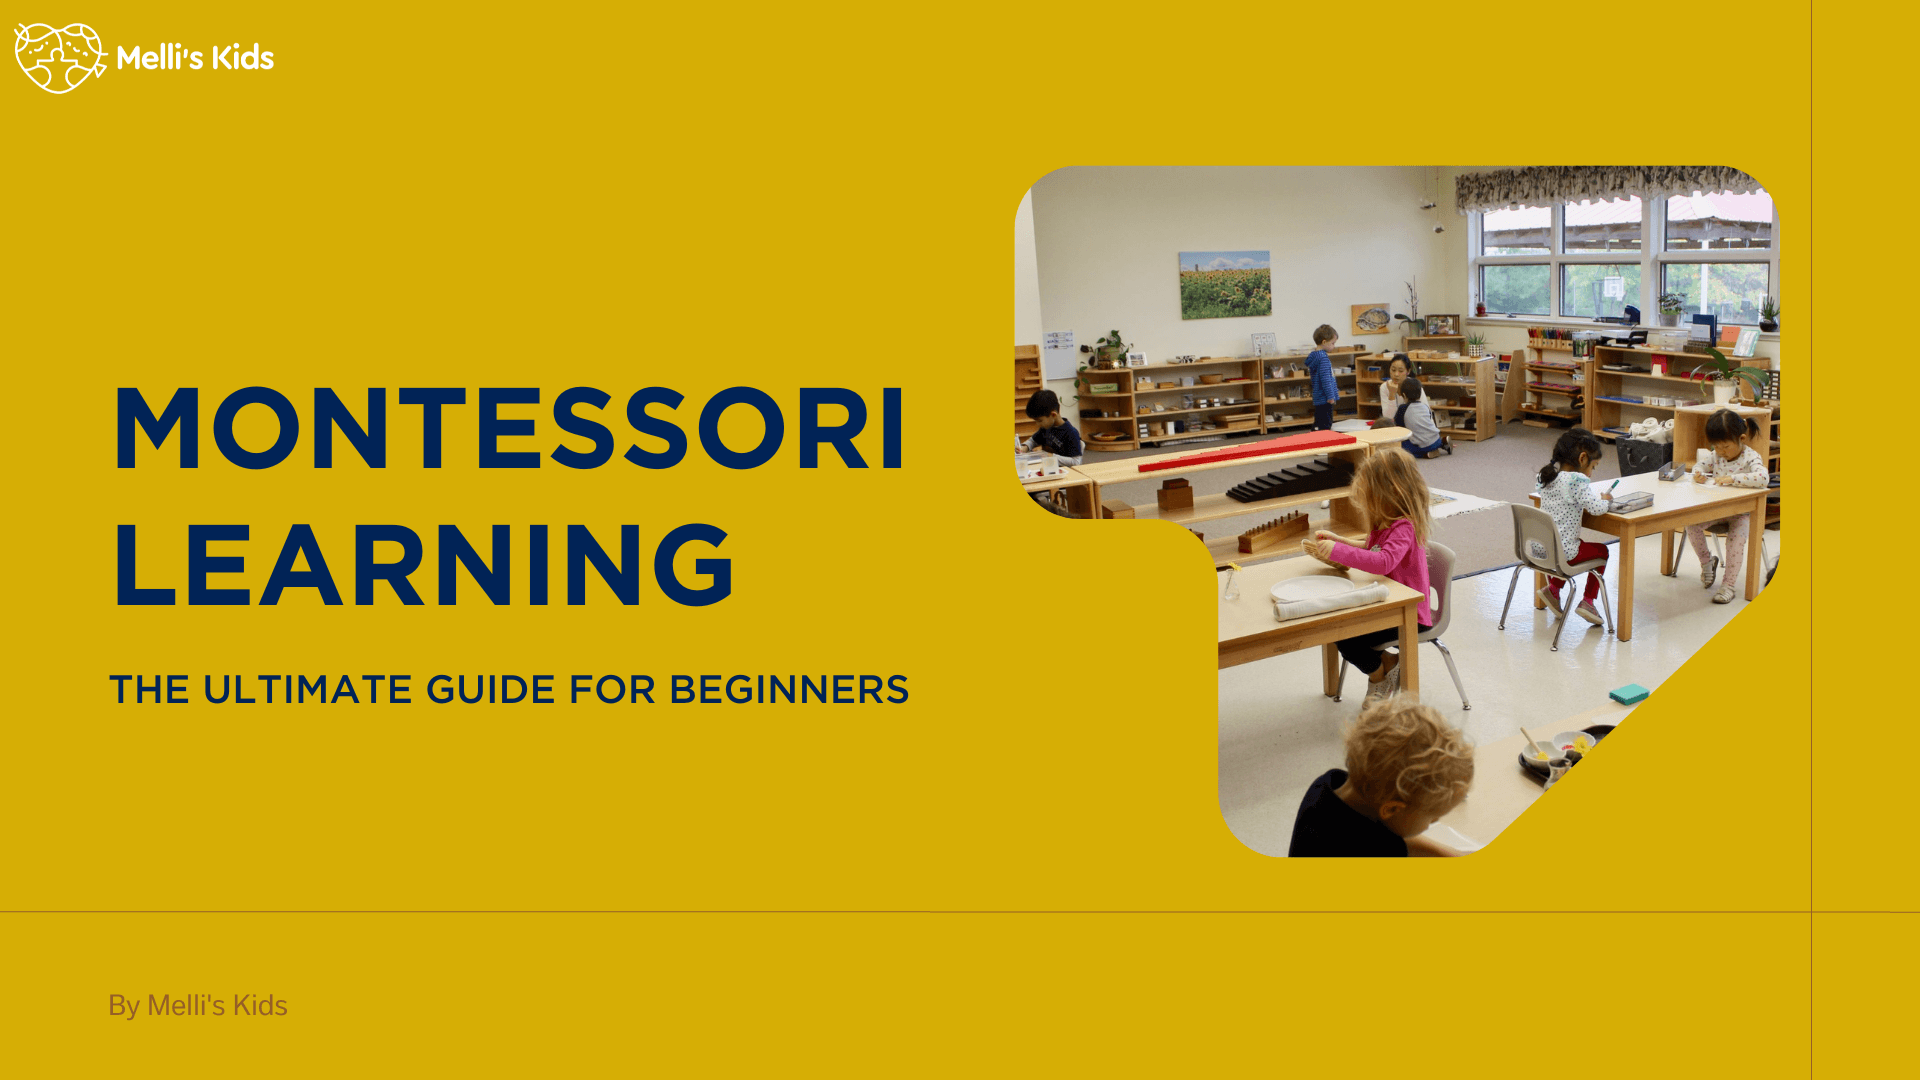 Montessori Learning - The Ultimate Guide for Beginners - Melli's Kids